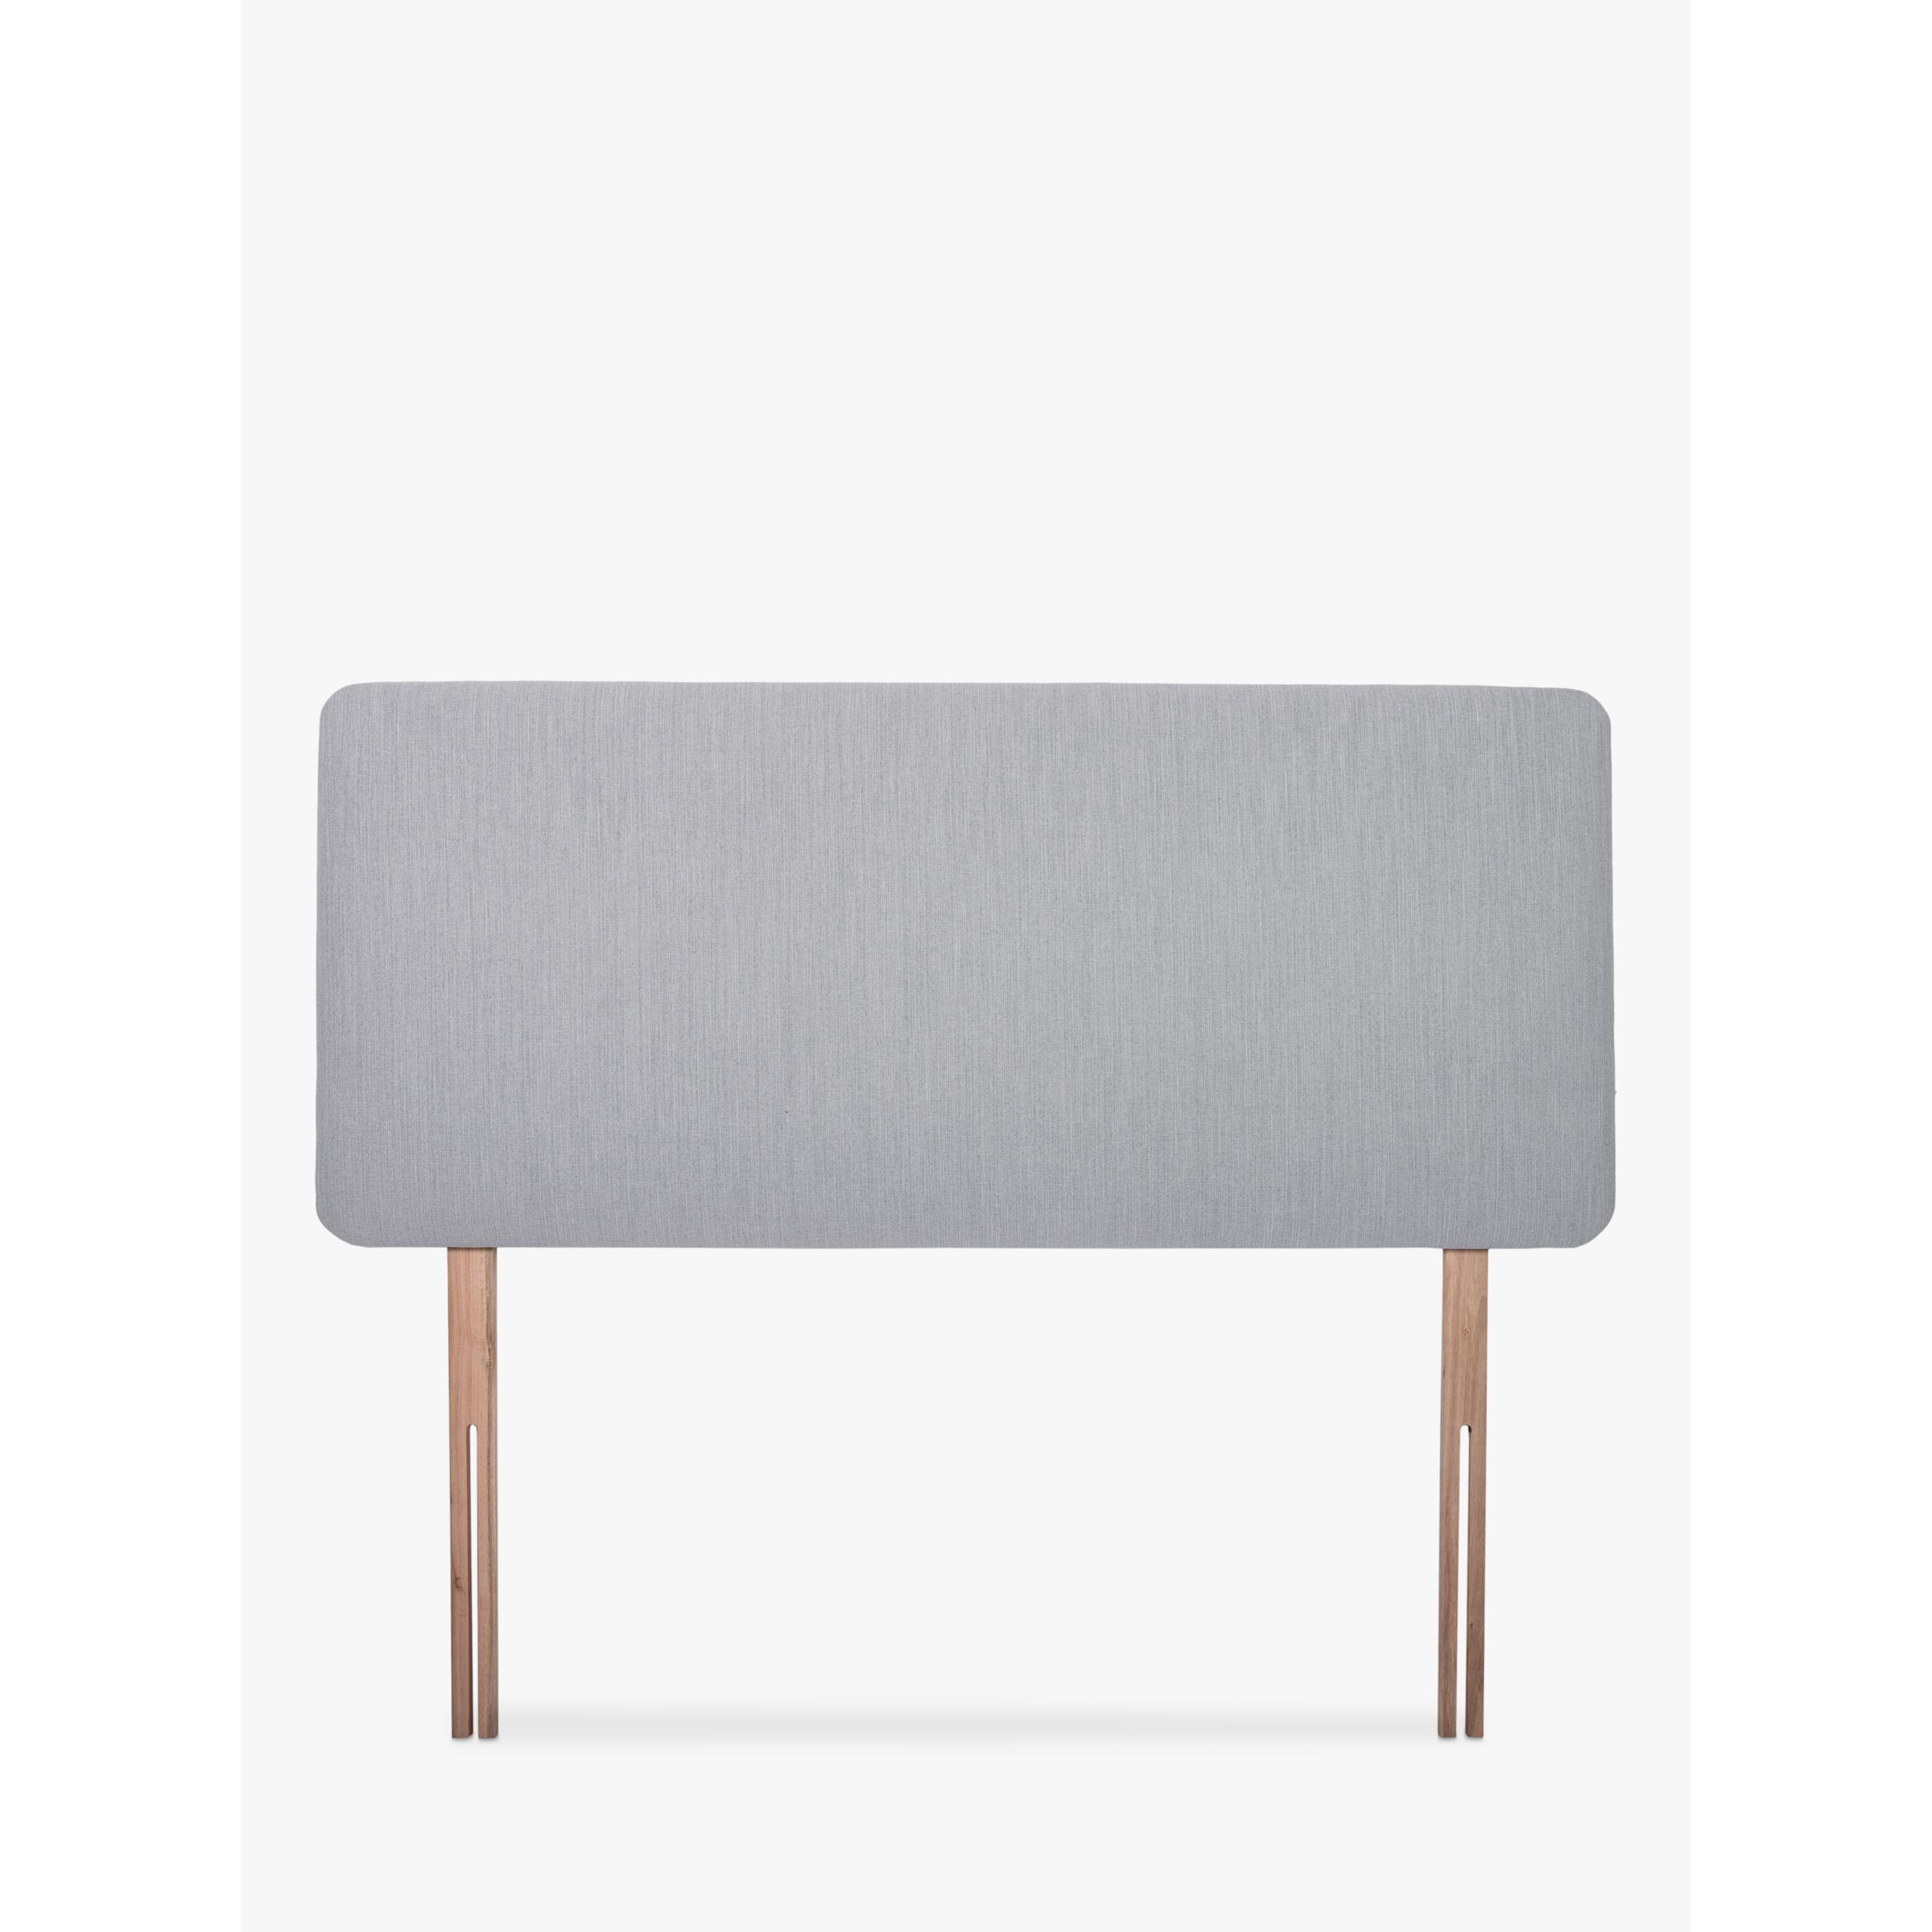 John Lewis Sonning Upholstered Headboard, Small Double - image 1